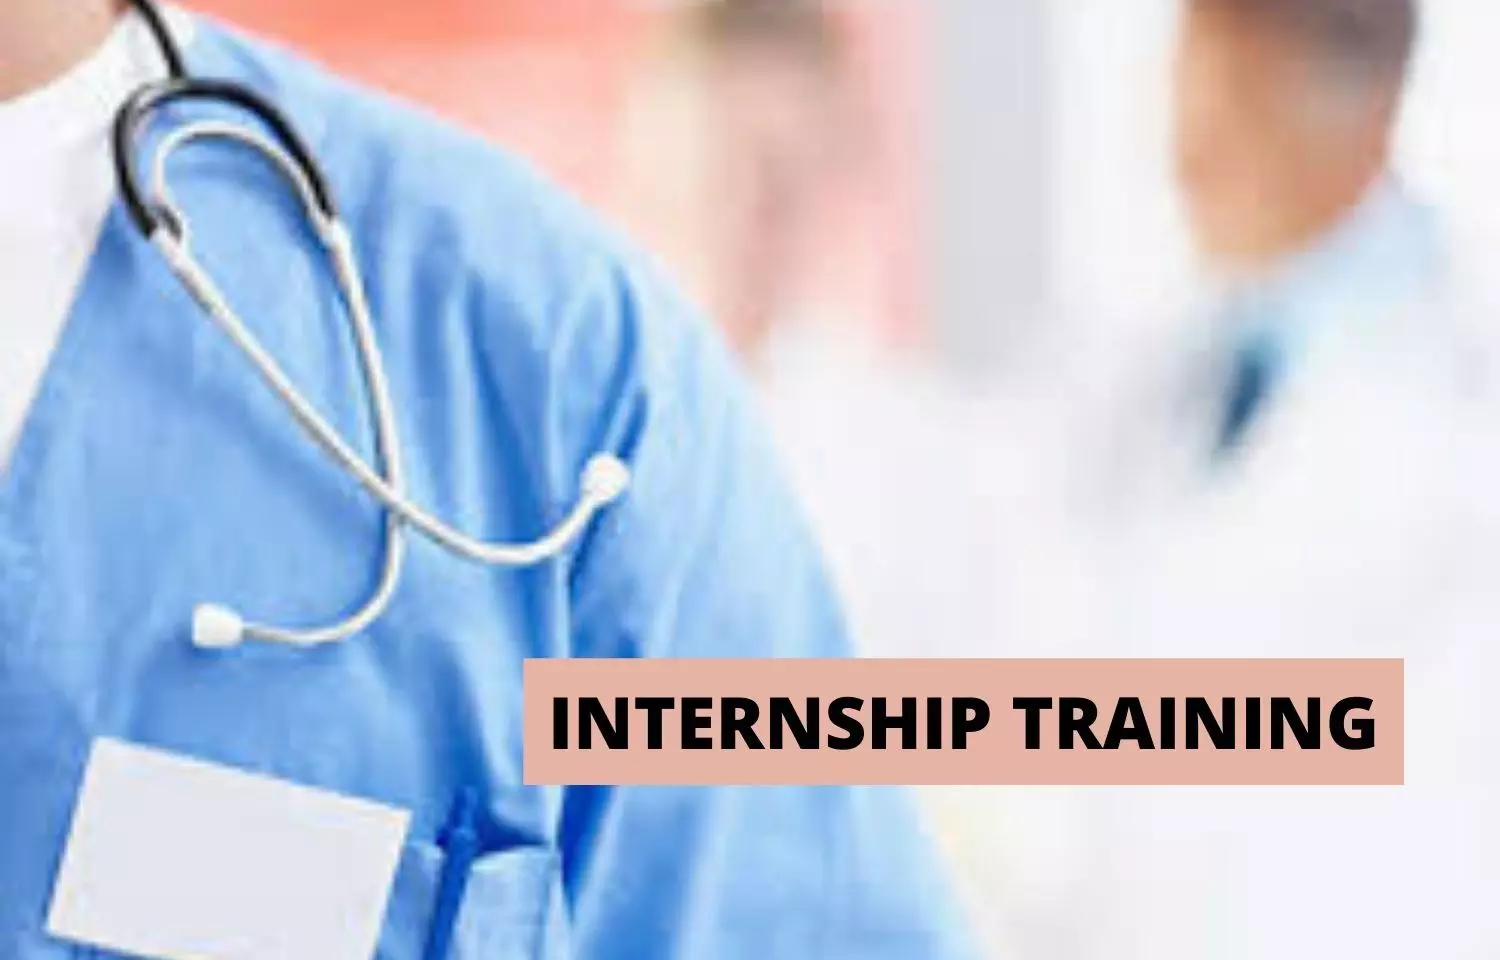 ESIC invites applications for MBBS Internship Training Programme, Check out details